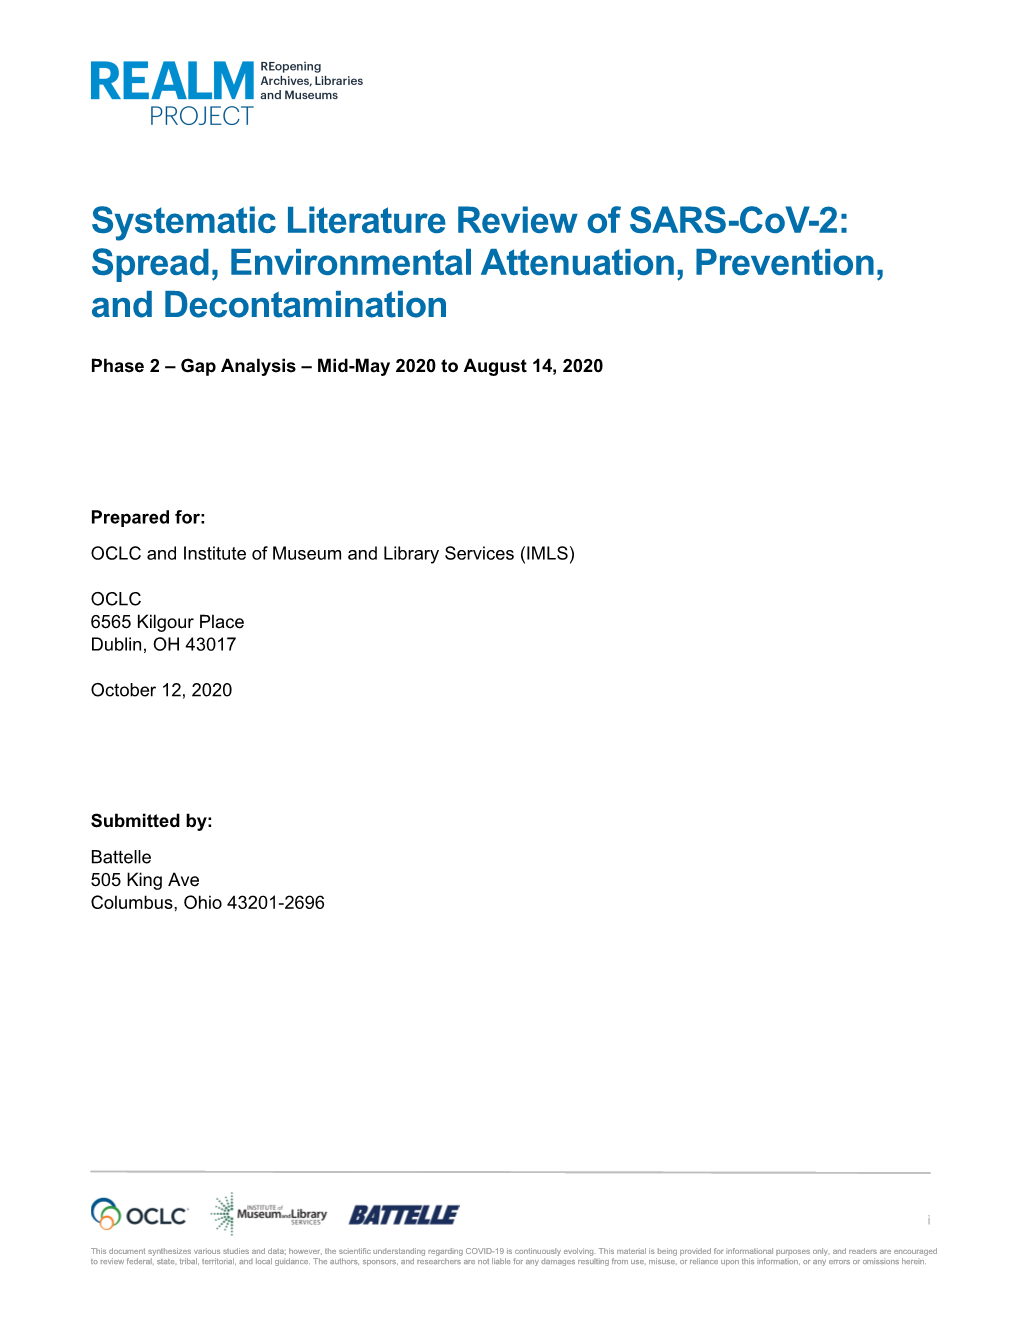 Systematic Literature Review of SARS-Cov-2: Spread, Environmental Attenuation, Prevention and Decontamination